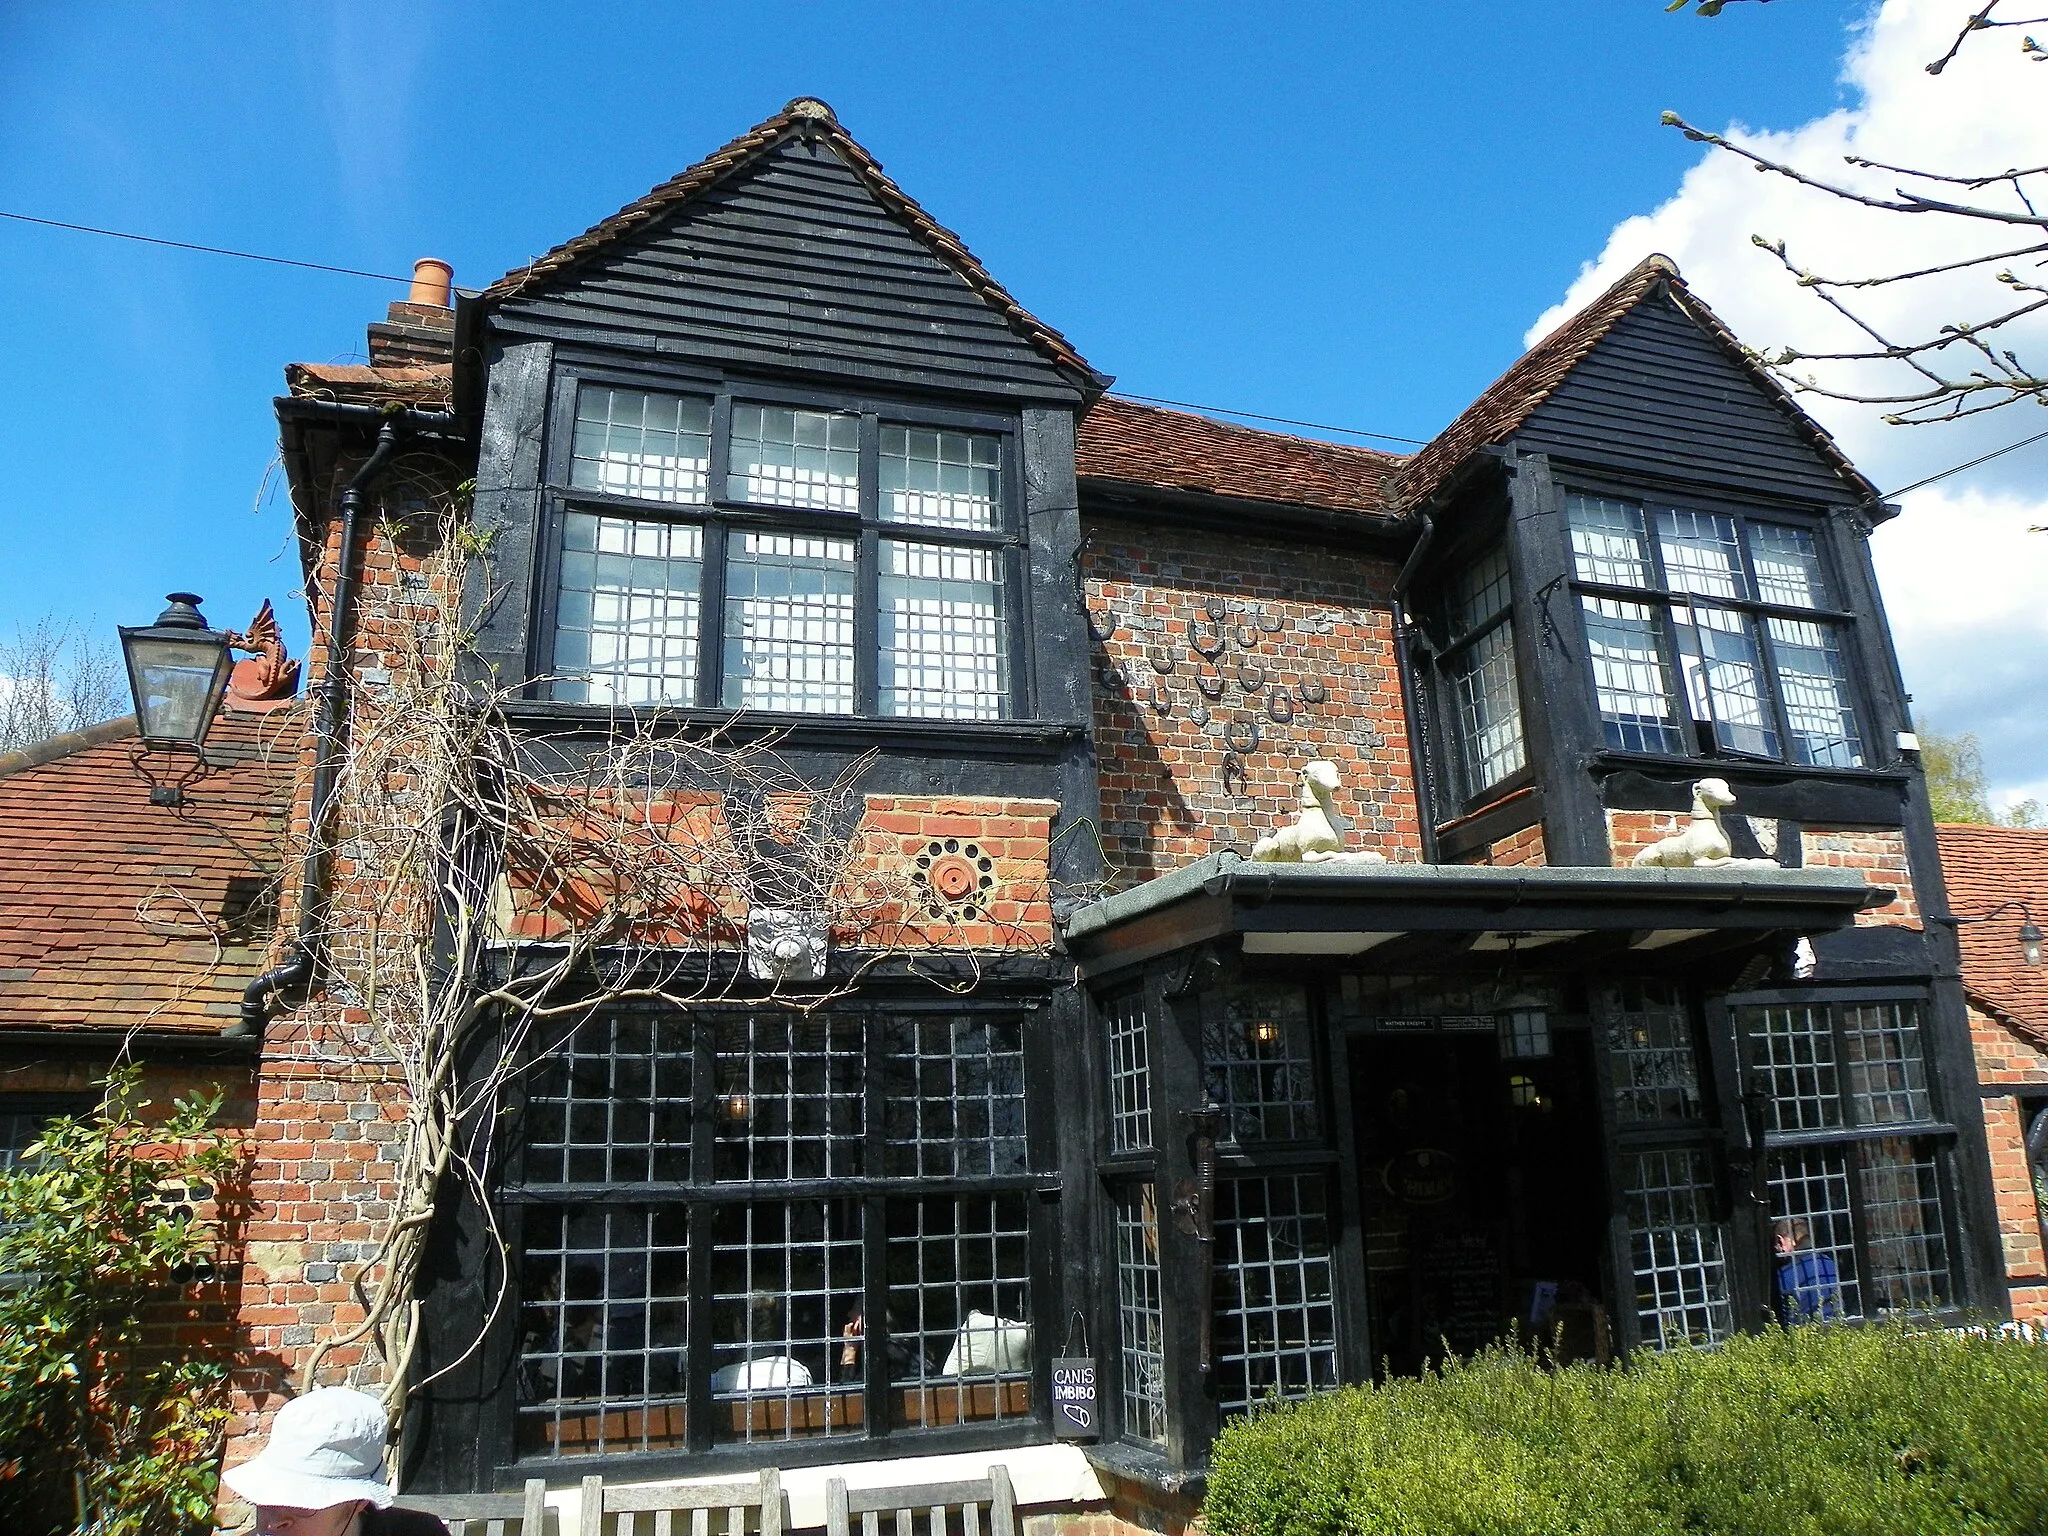 Photo showing: The Royal Standard of England, Forty Green, Buckinghamshire. I'm surprised this is not a listed building, considering it claims to be the oldest free house in England!